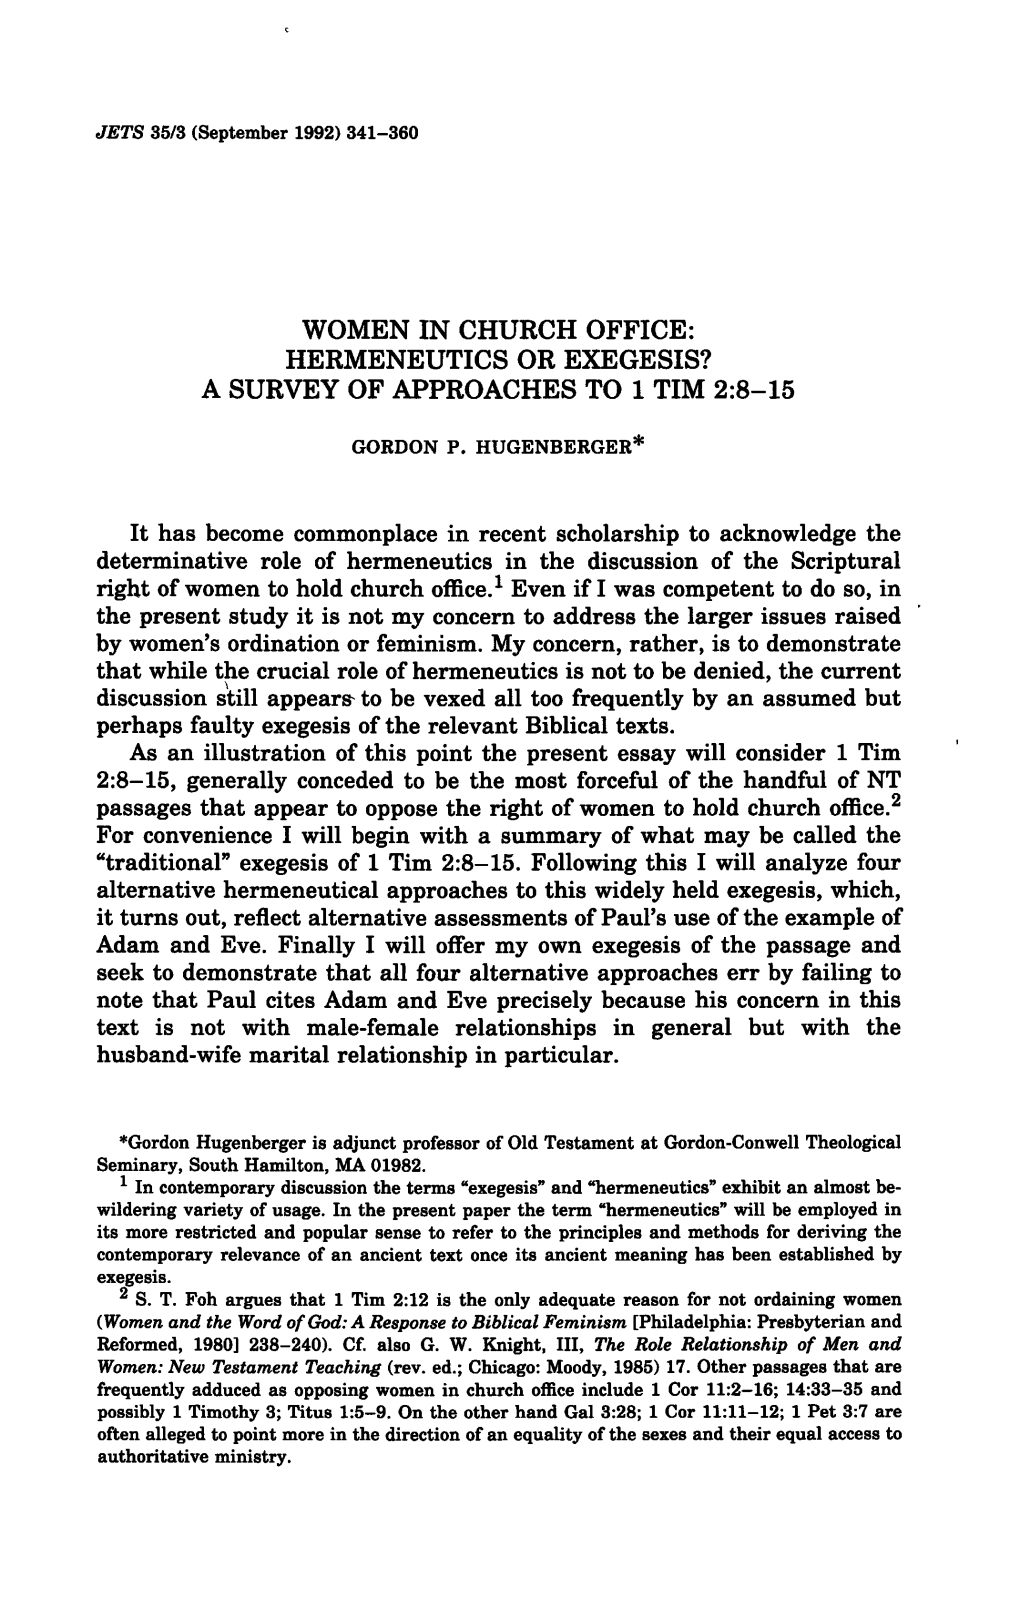 Women in Church Office: Hermeneutics Or Exegesis? a Survey of Approaches to 1 Tim 2:8-15